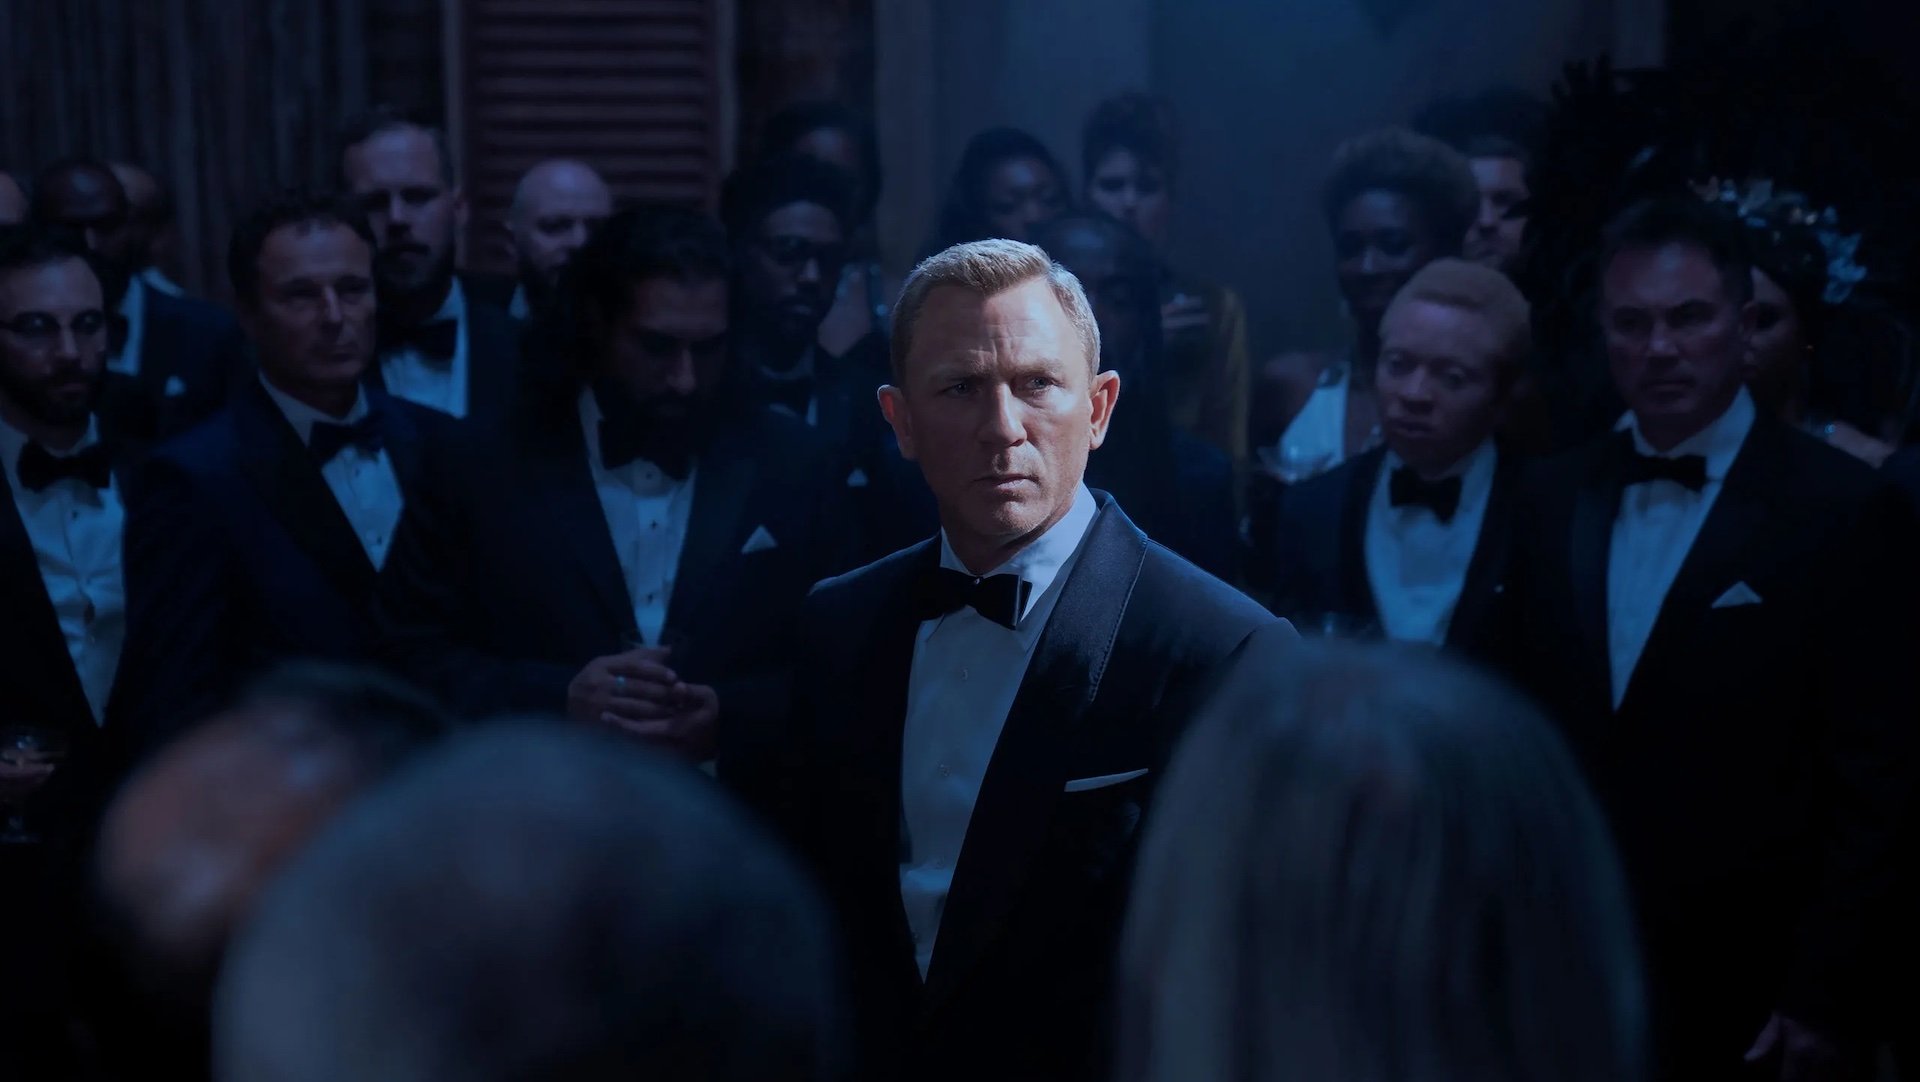 James Bond (Daniel Craig) standing in a circle of men in suits in 'No Time to Die'